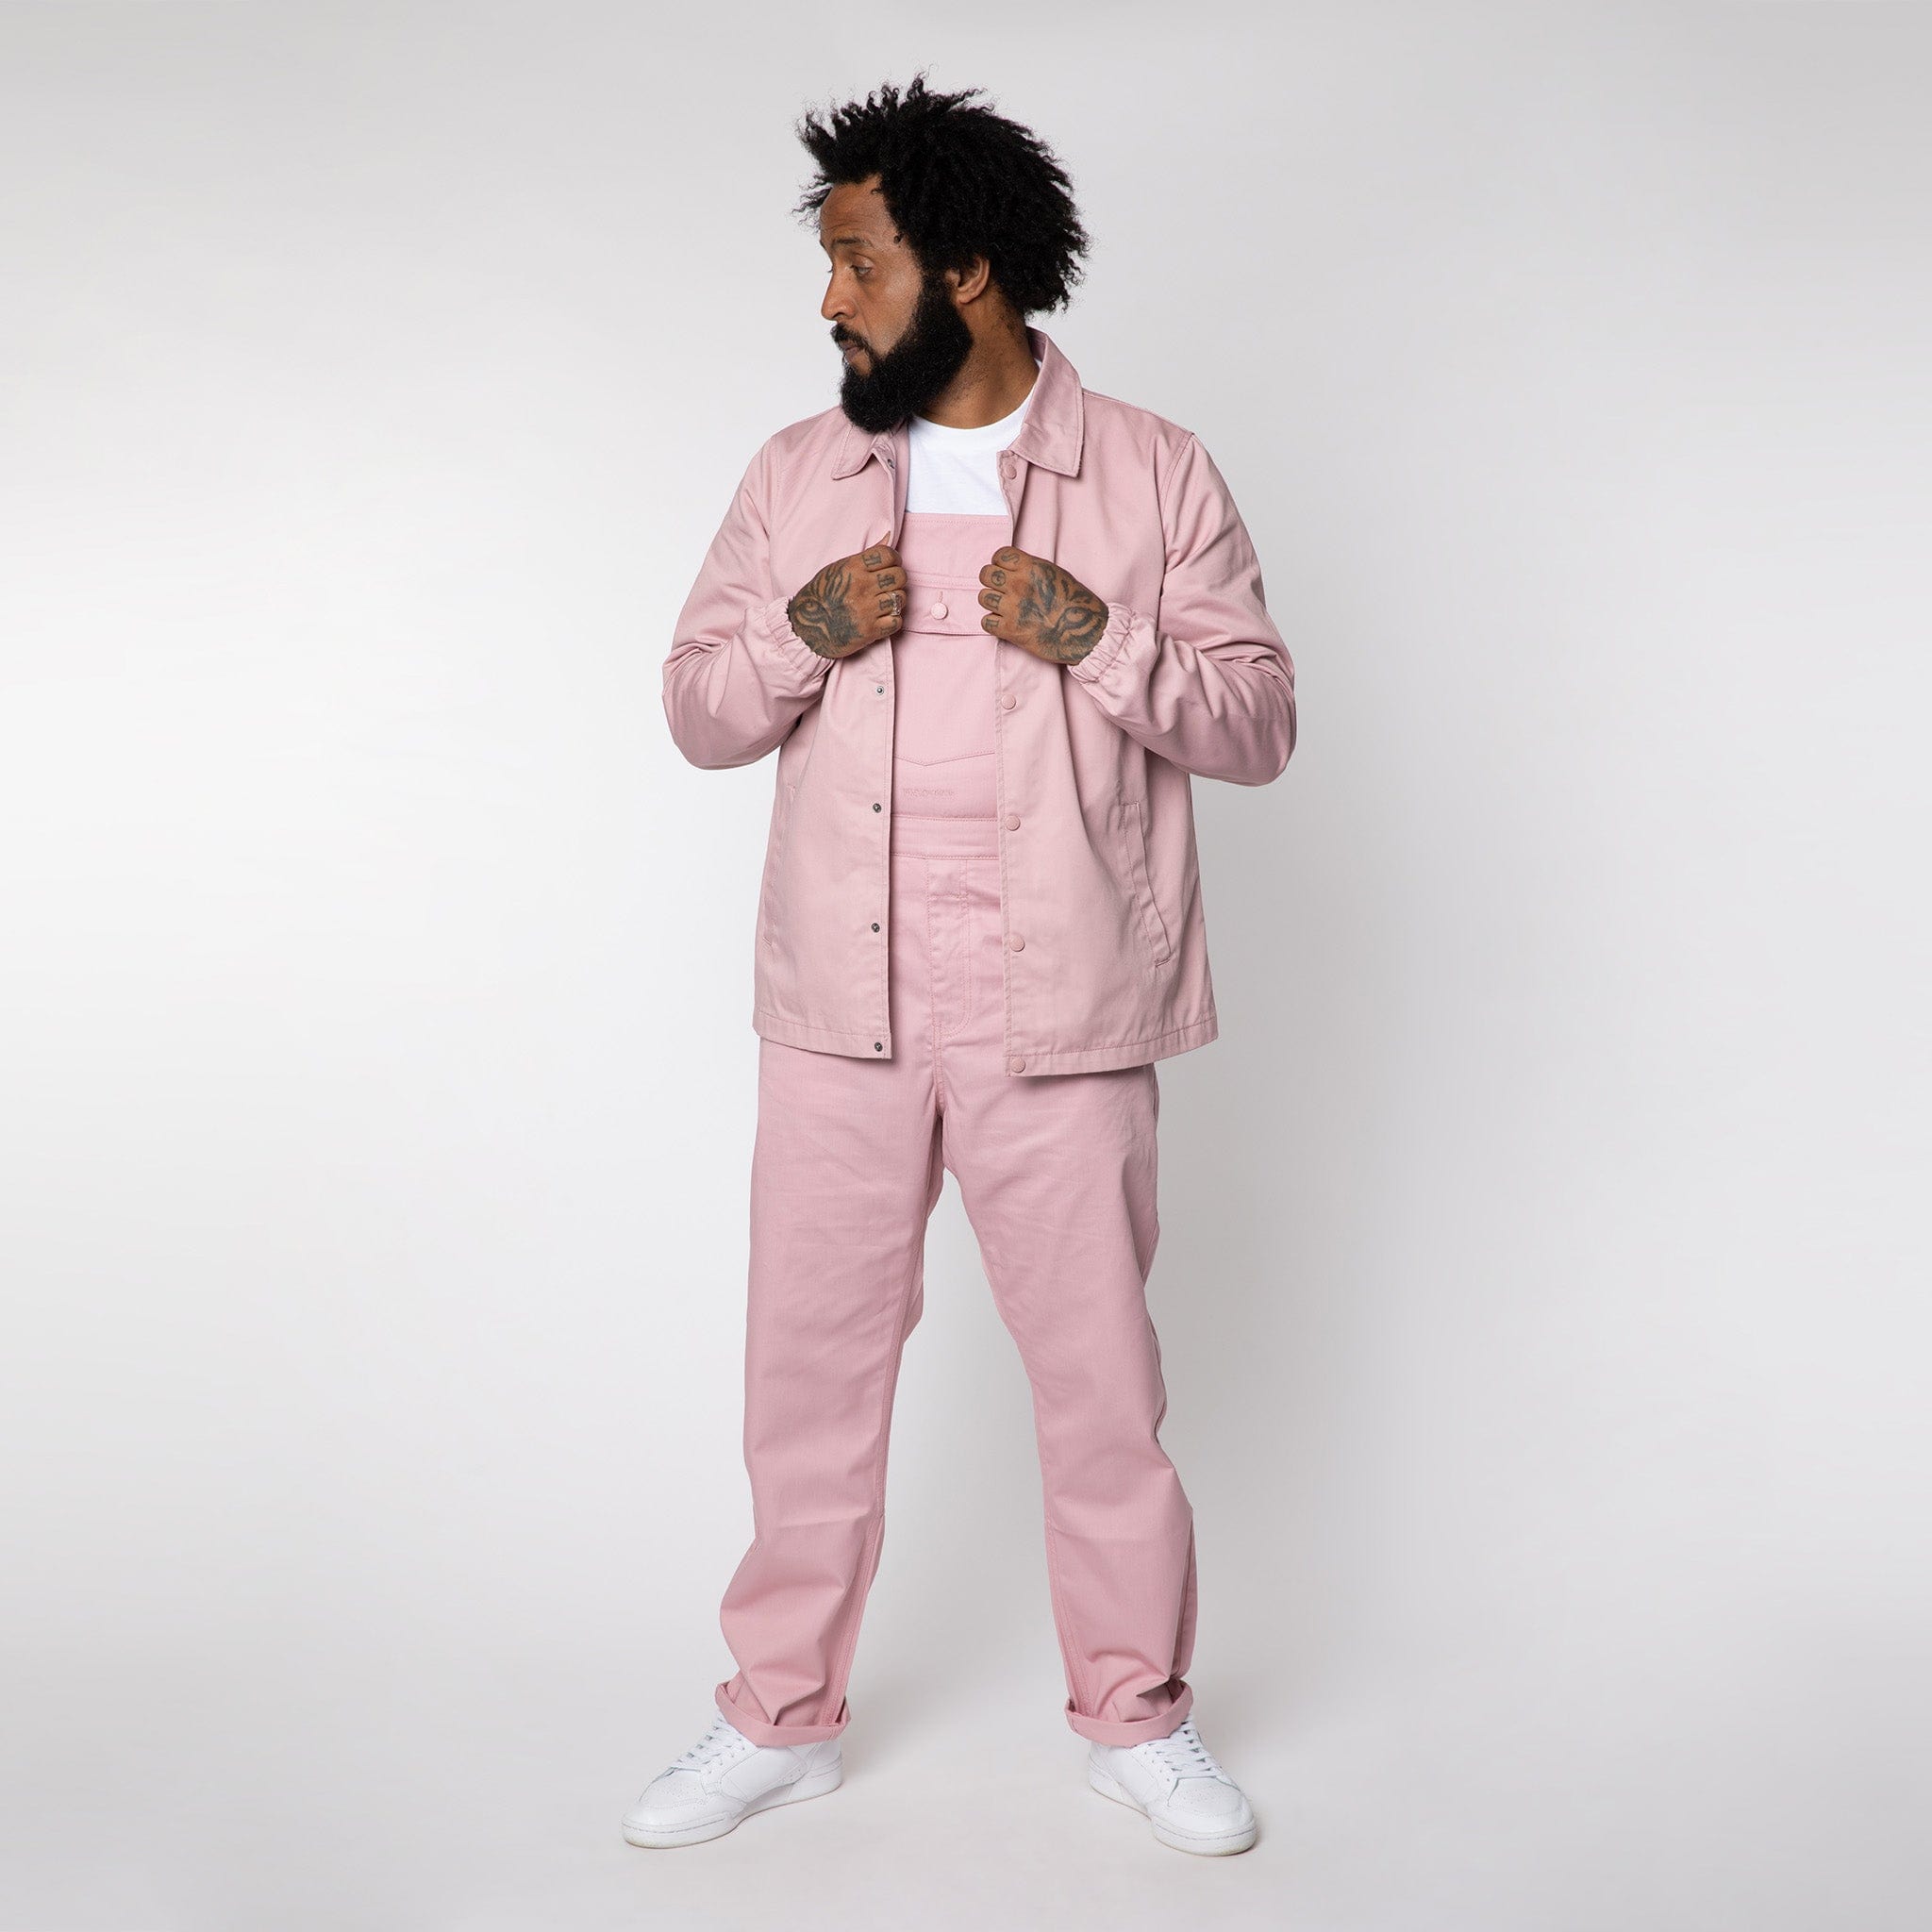 Men&#39;s Polycotton Pink Dungarees Worn With Dusty Pink Work Jacket.